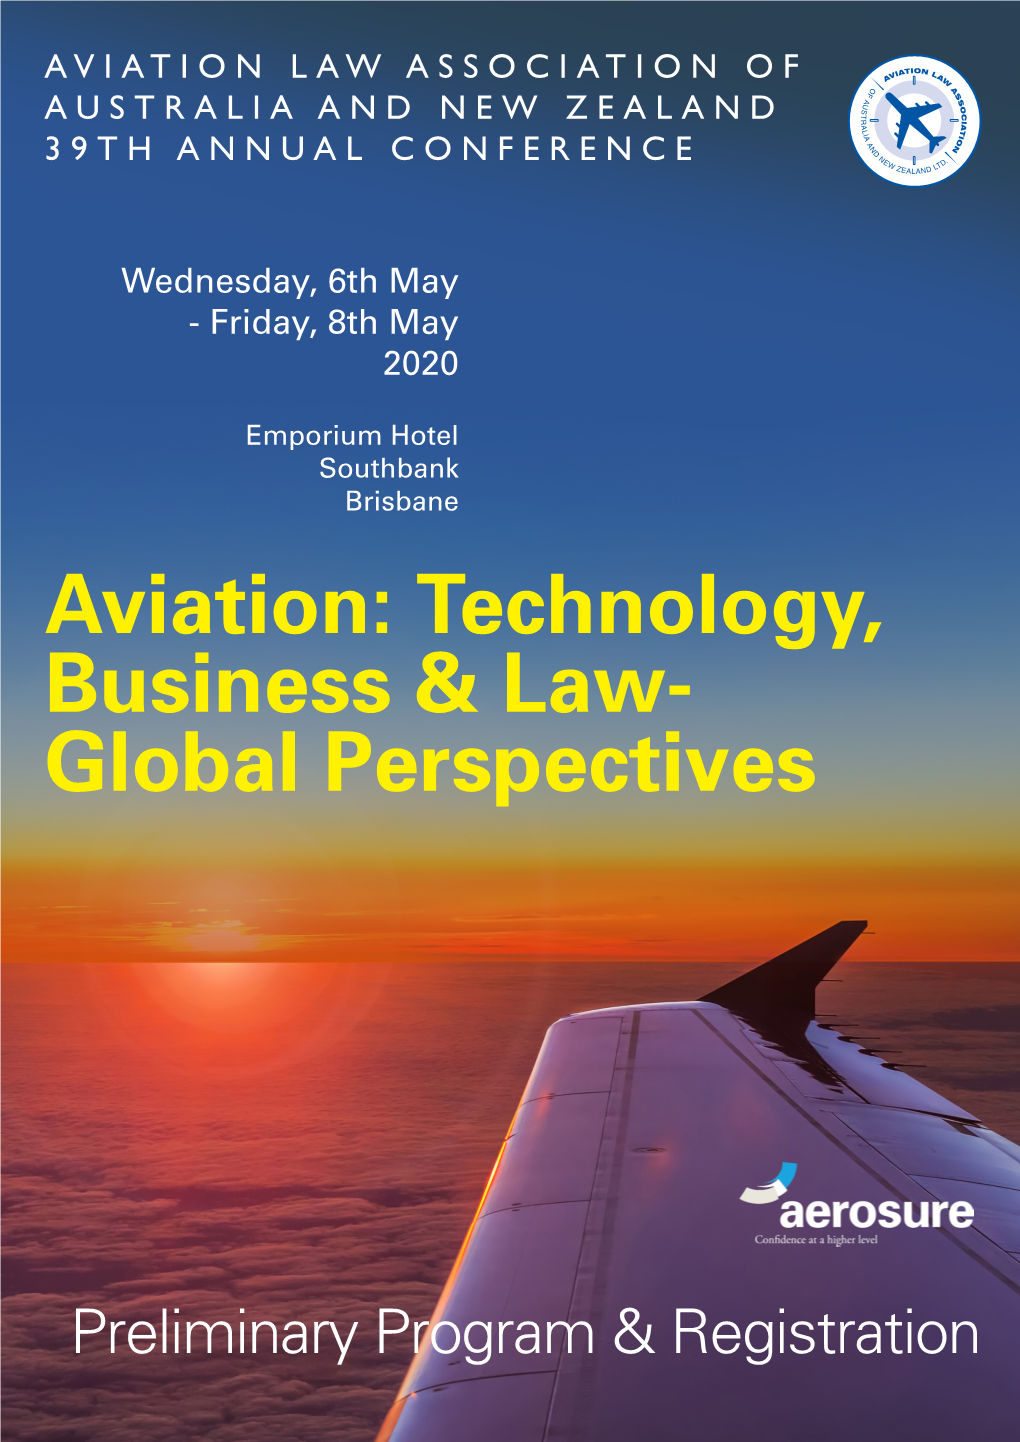 Aviation: Technology, Business & Law- Global Perspectives